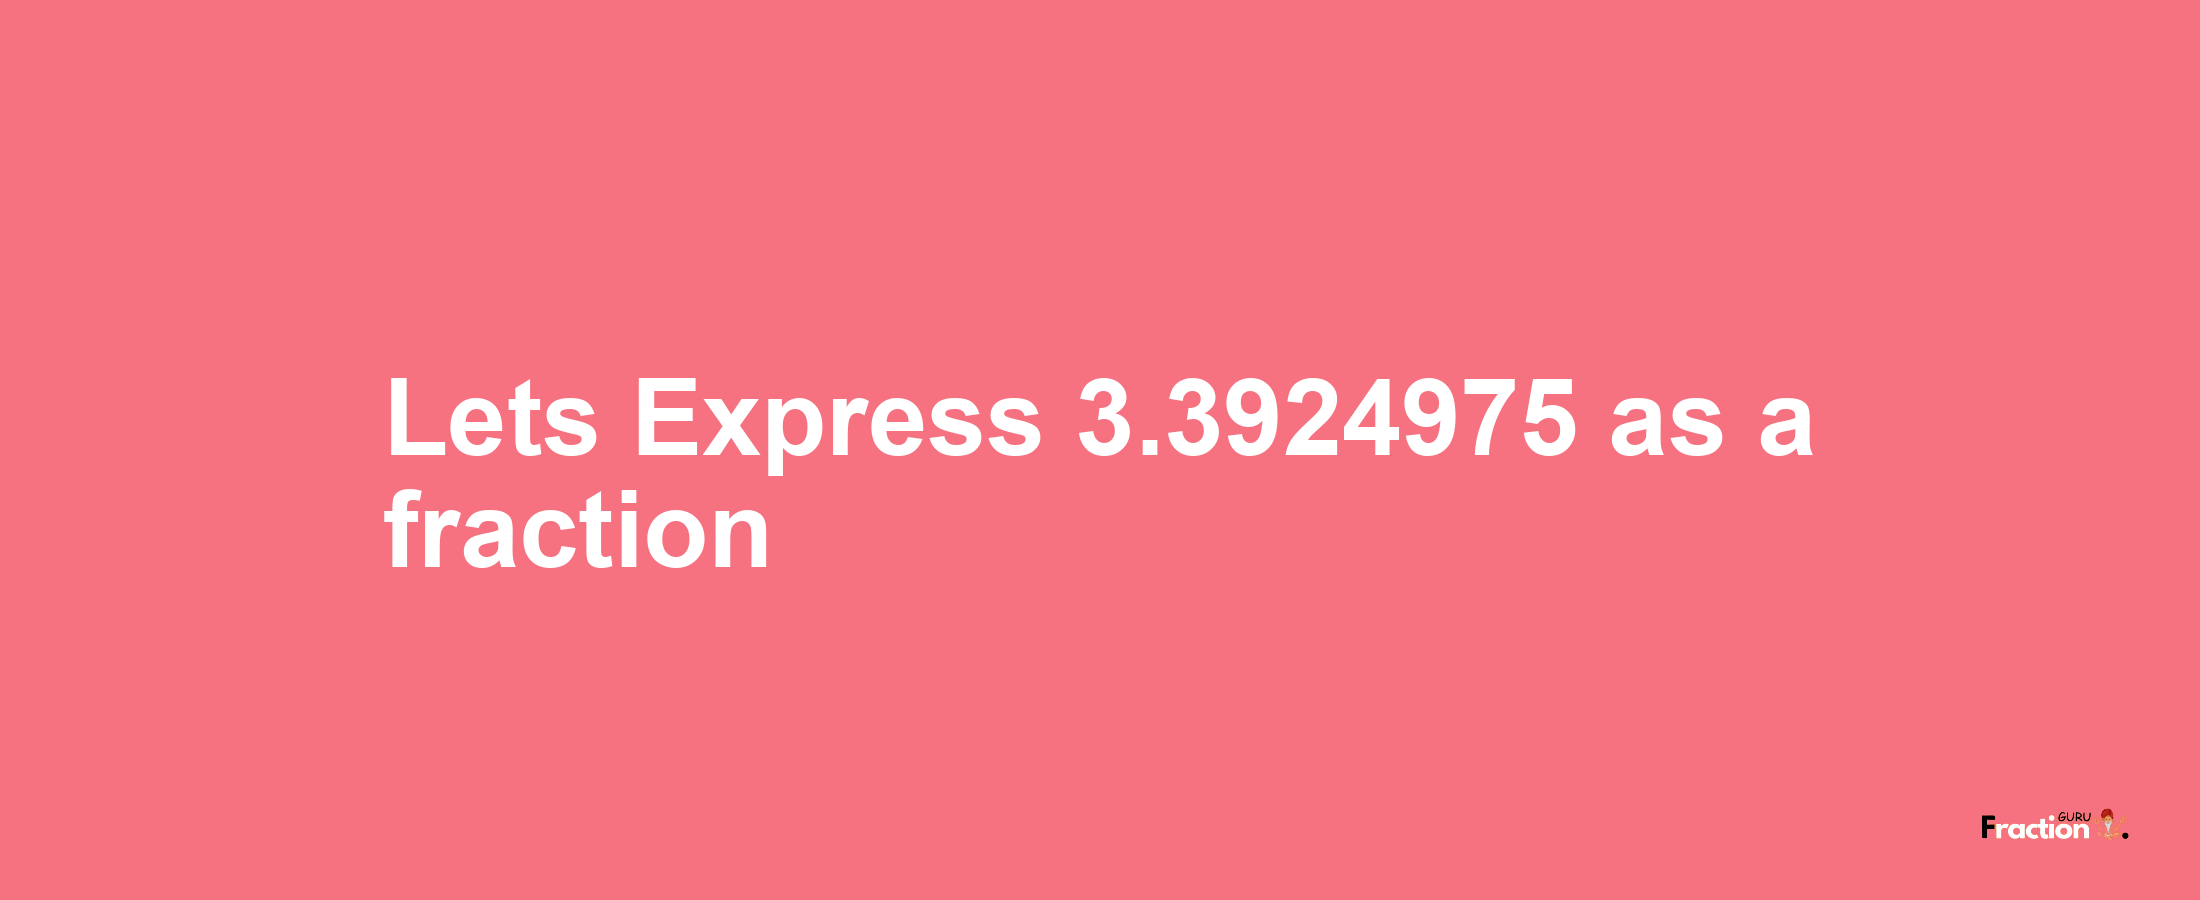 Lets Express 3.3924975 as afraction